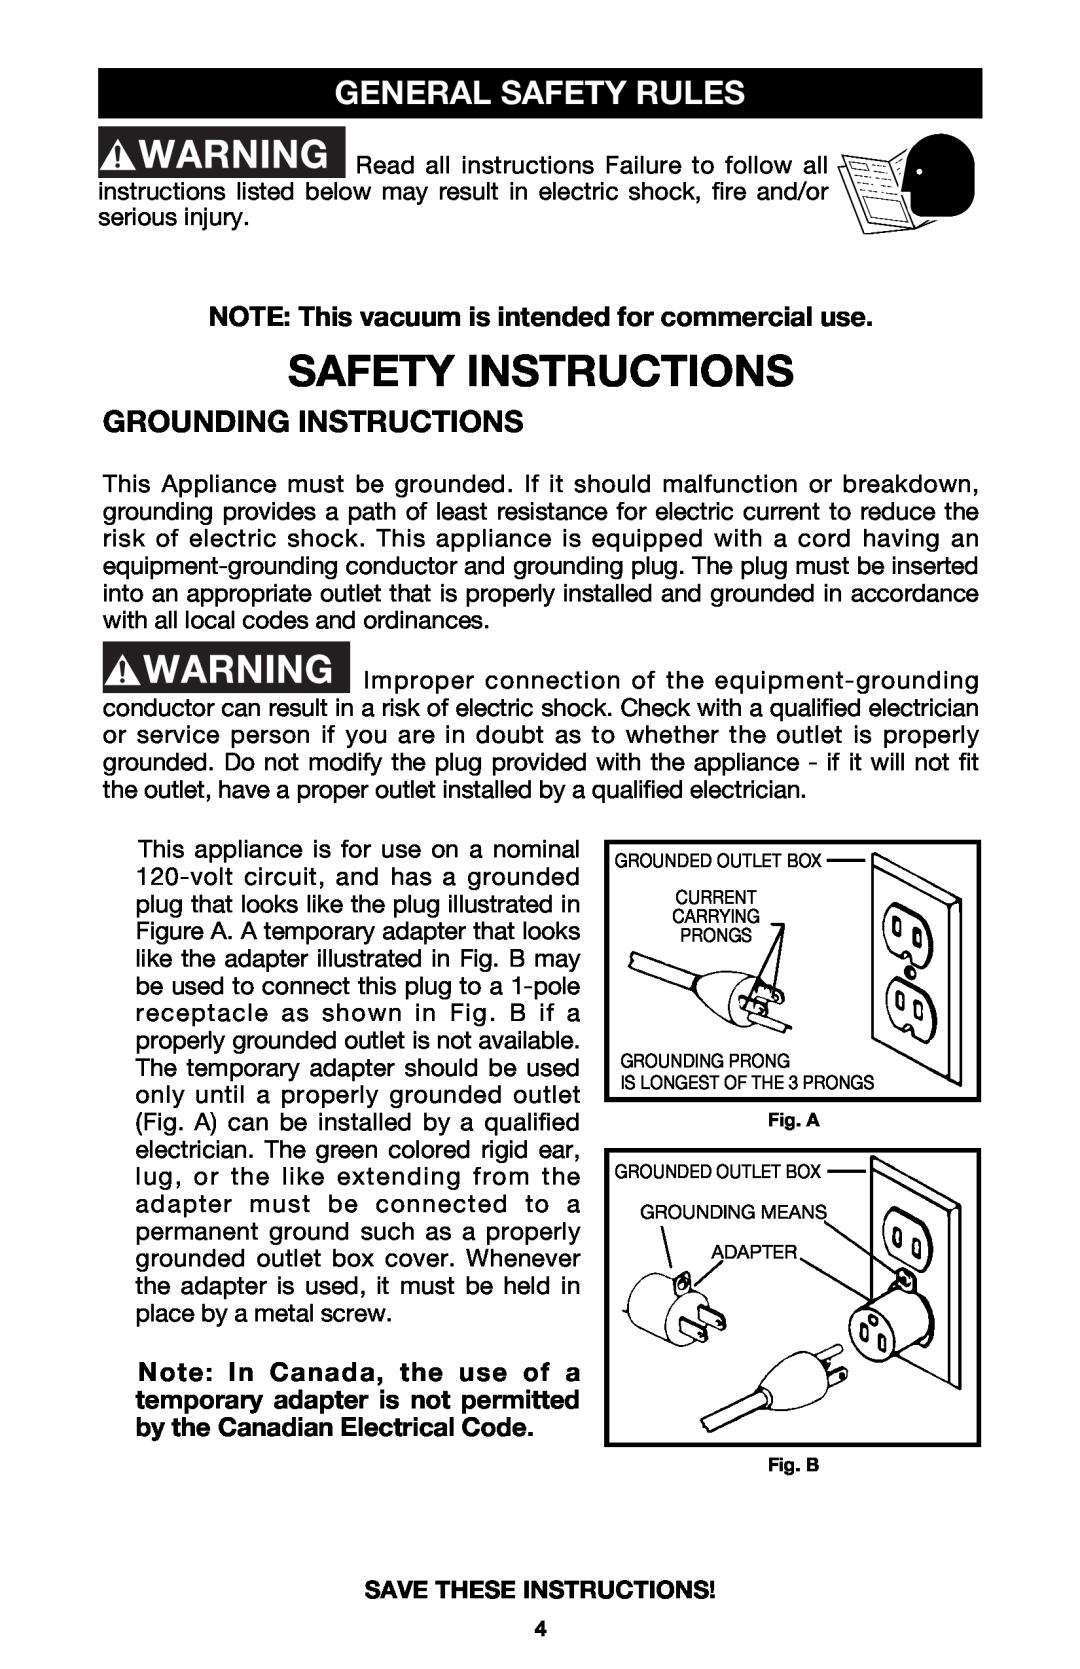 Porter-Cable 7814 General Safety Rules, Grounding Instructions, NOTE This vacuum is intended for commercial use 